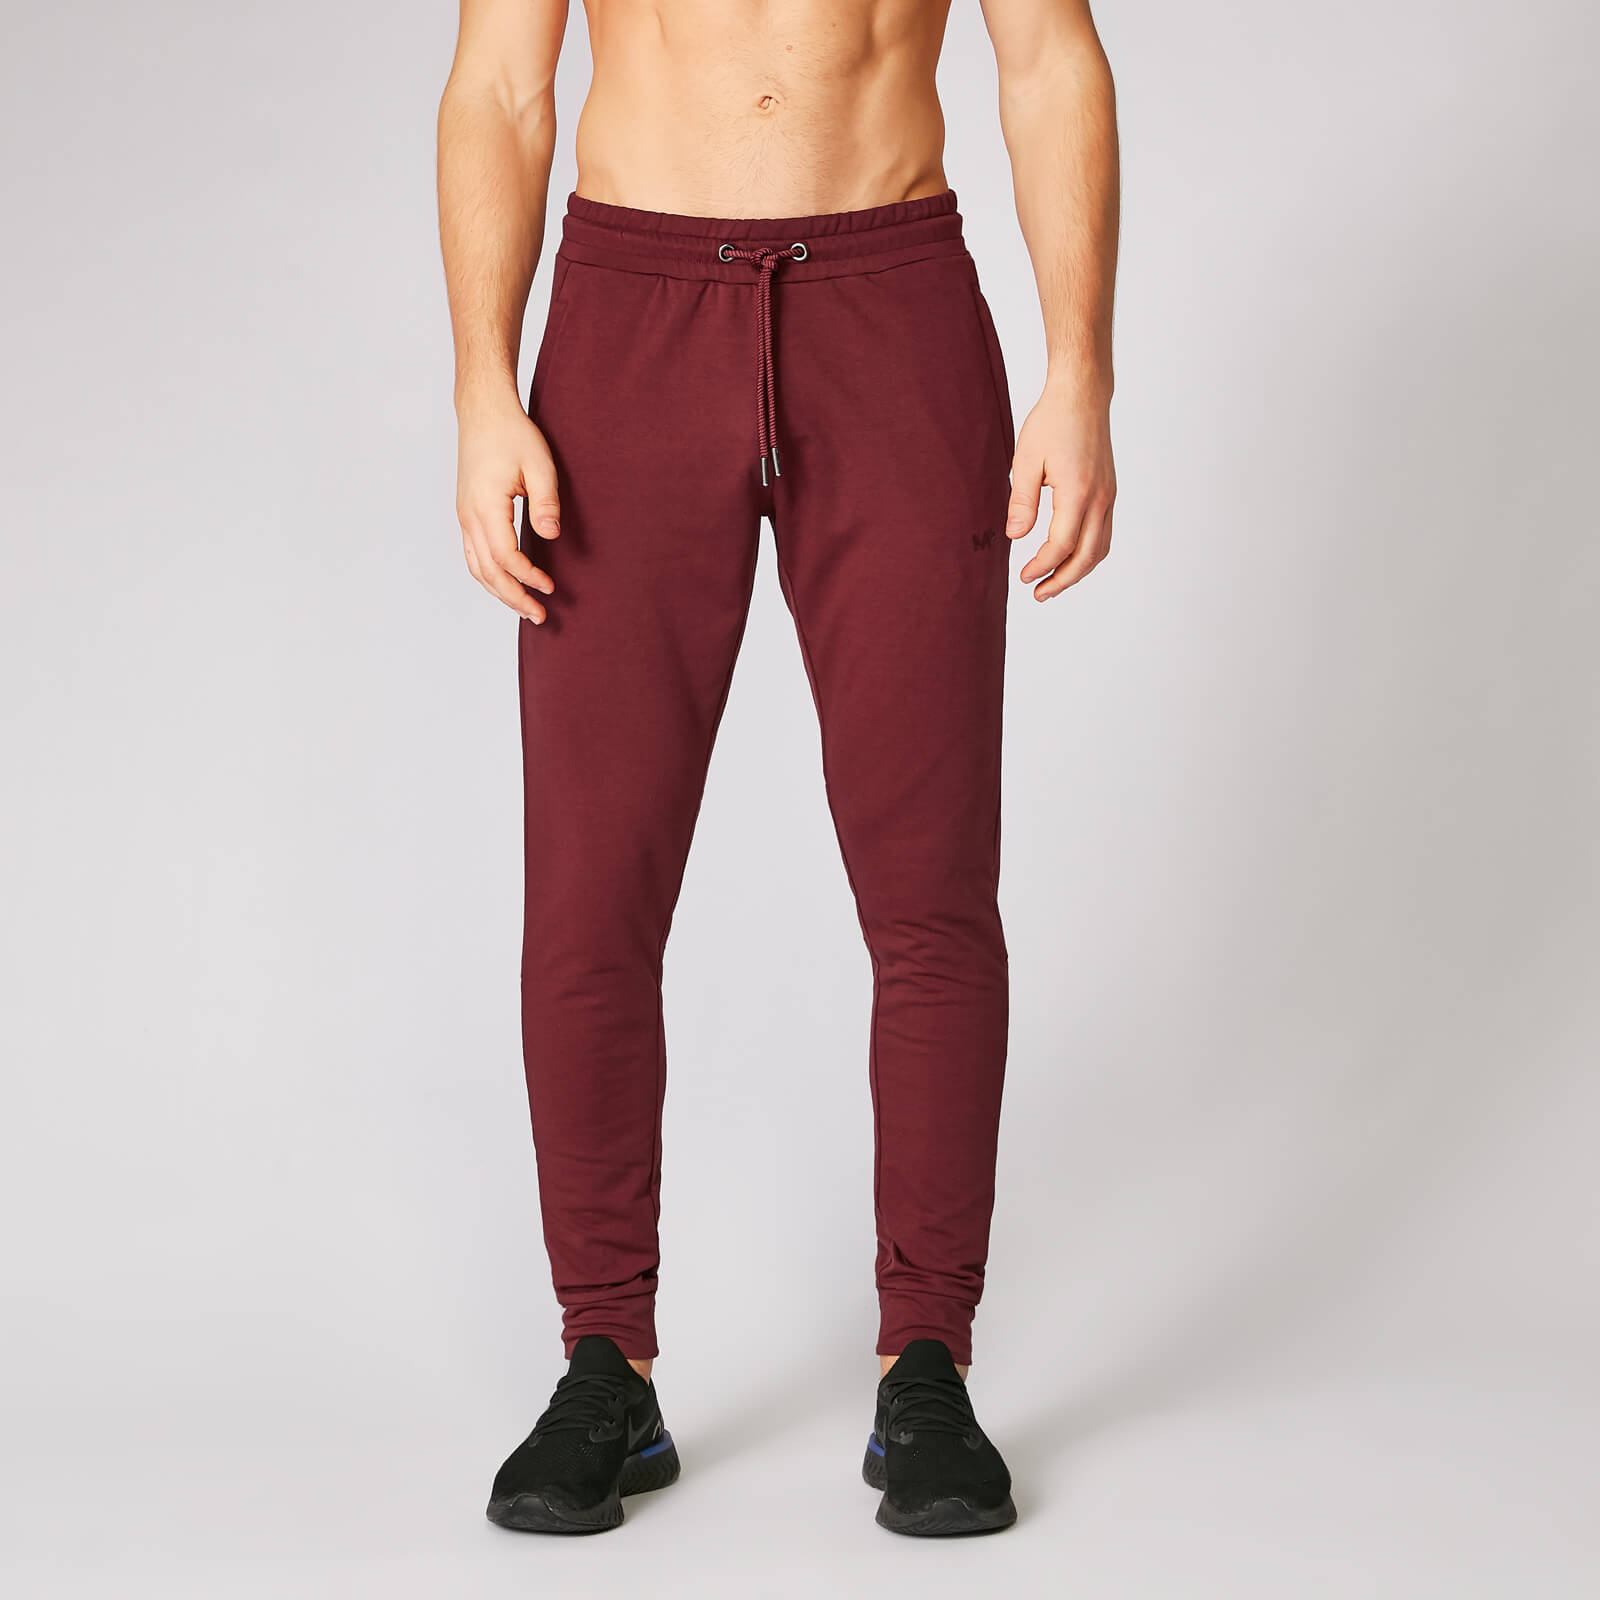 Myprotein Form Slim Fit Joggers - Oxblood